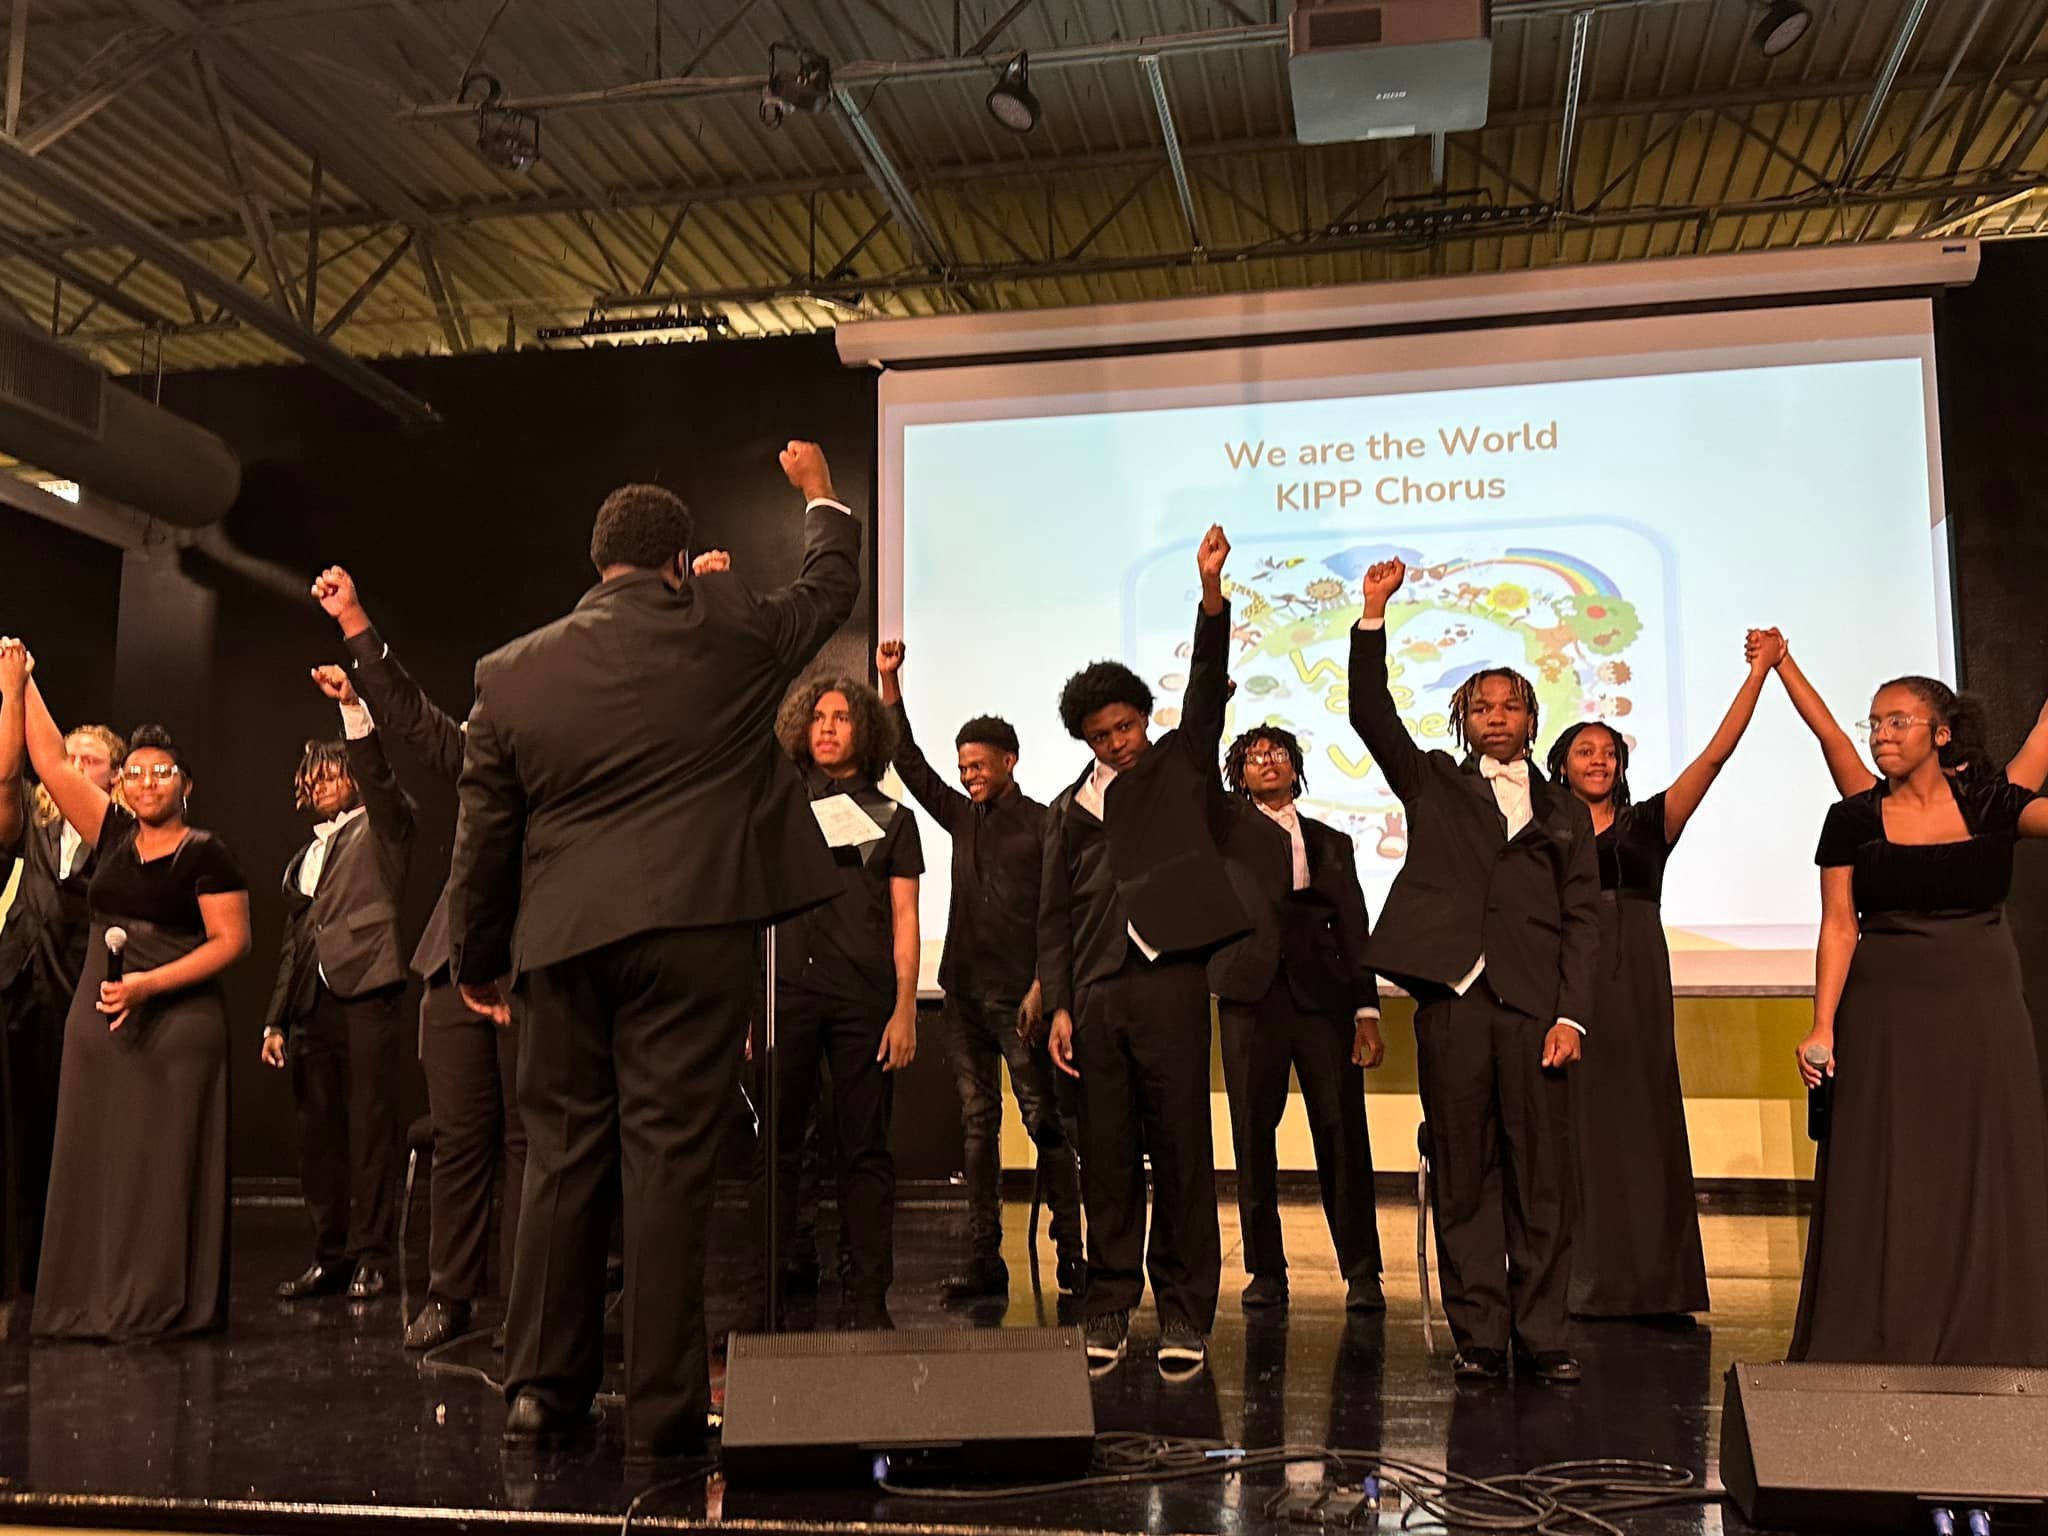 Our KIPPsters performed &ldquo;We are the World&rdquo; at last night&rsquo;s &lsquo;Fireside Chat&rsquo; with our partners The Memphis Lift and MSCS Superintendent Dr. Feagins, a song that resonates the importance of investing in our future and showi